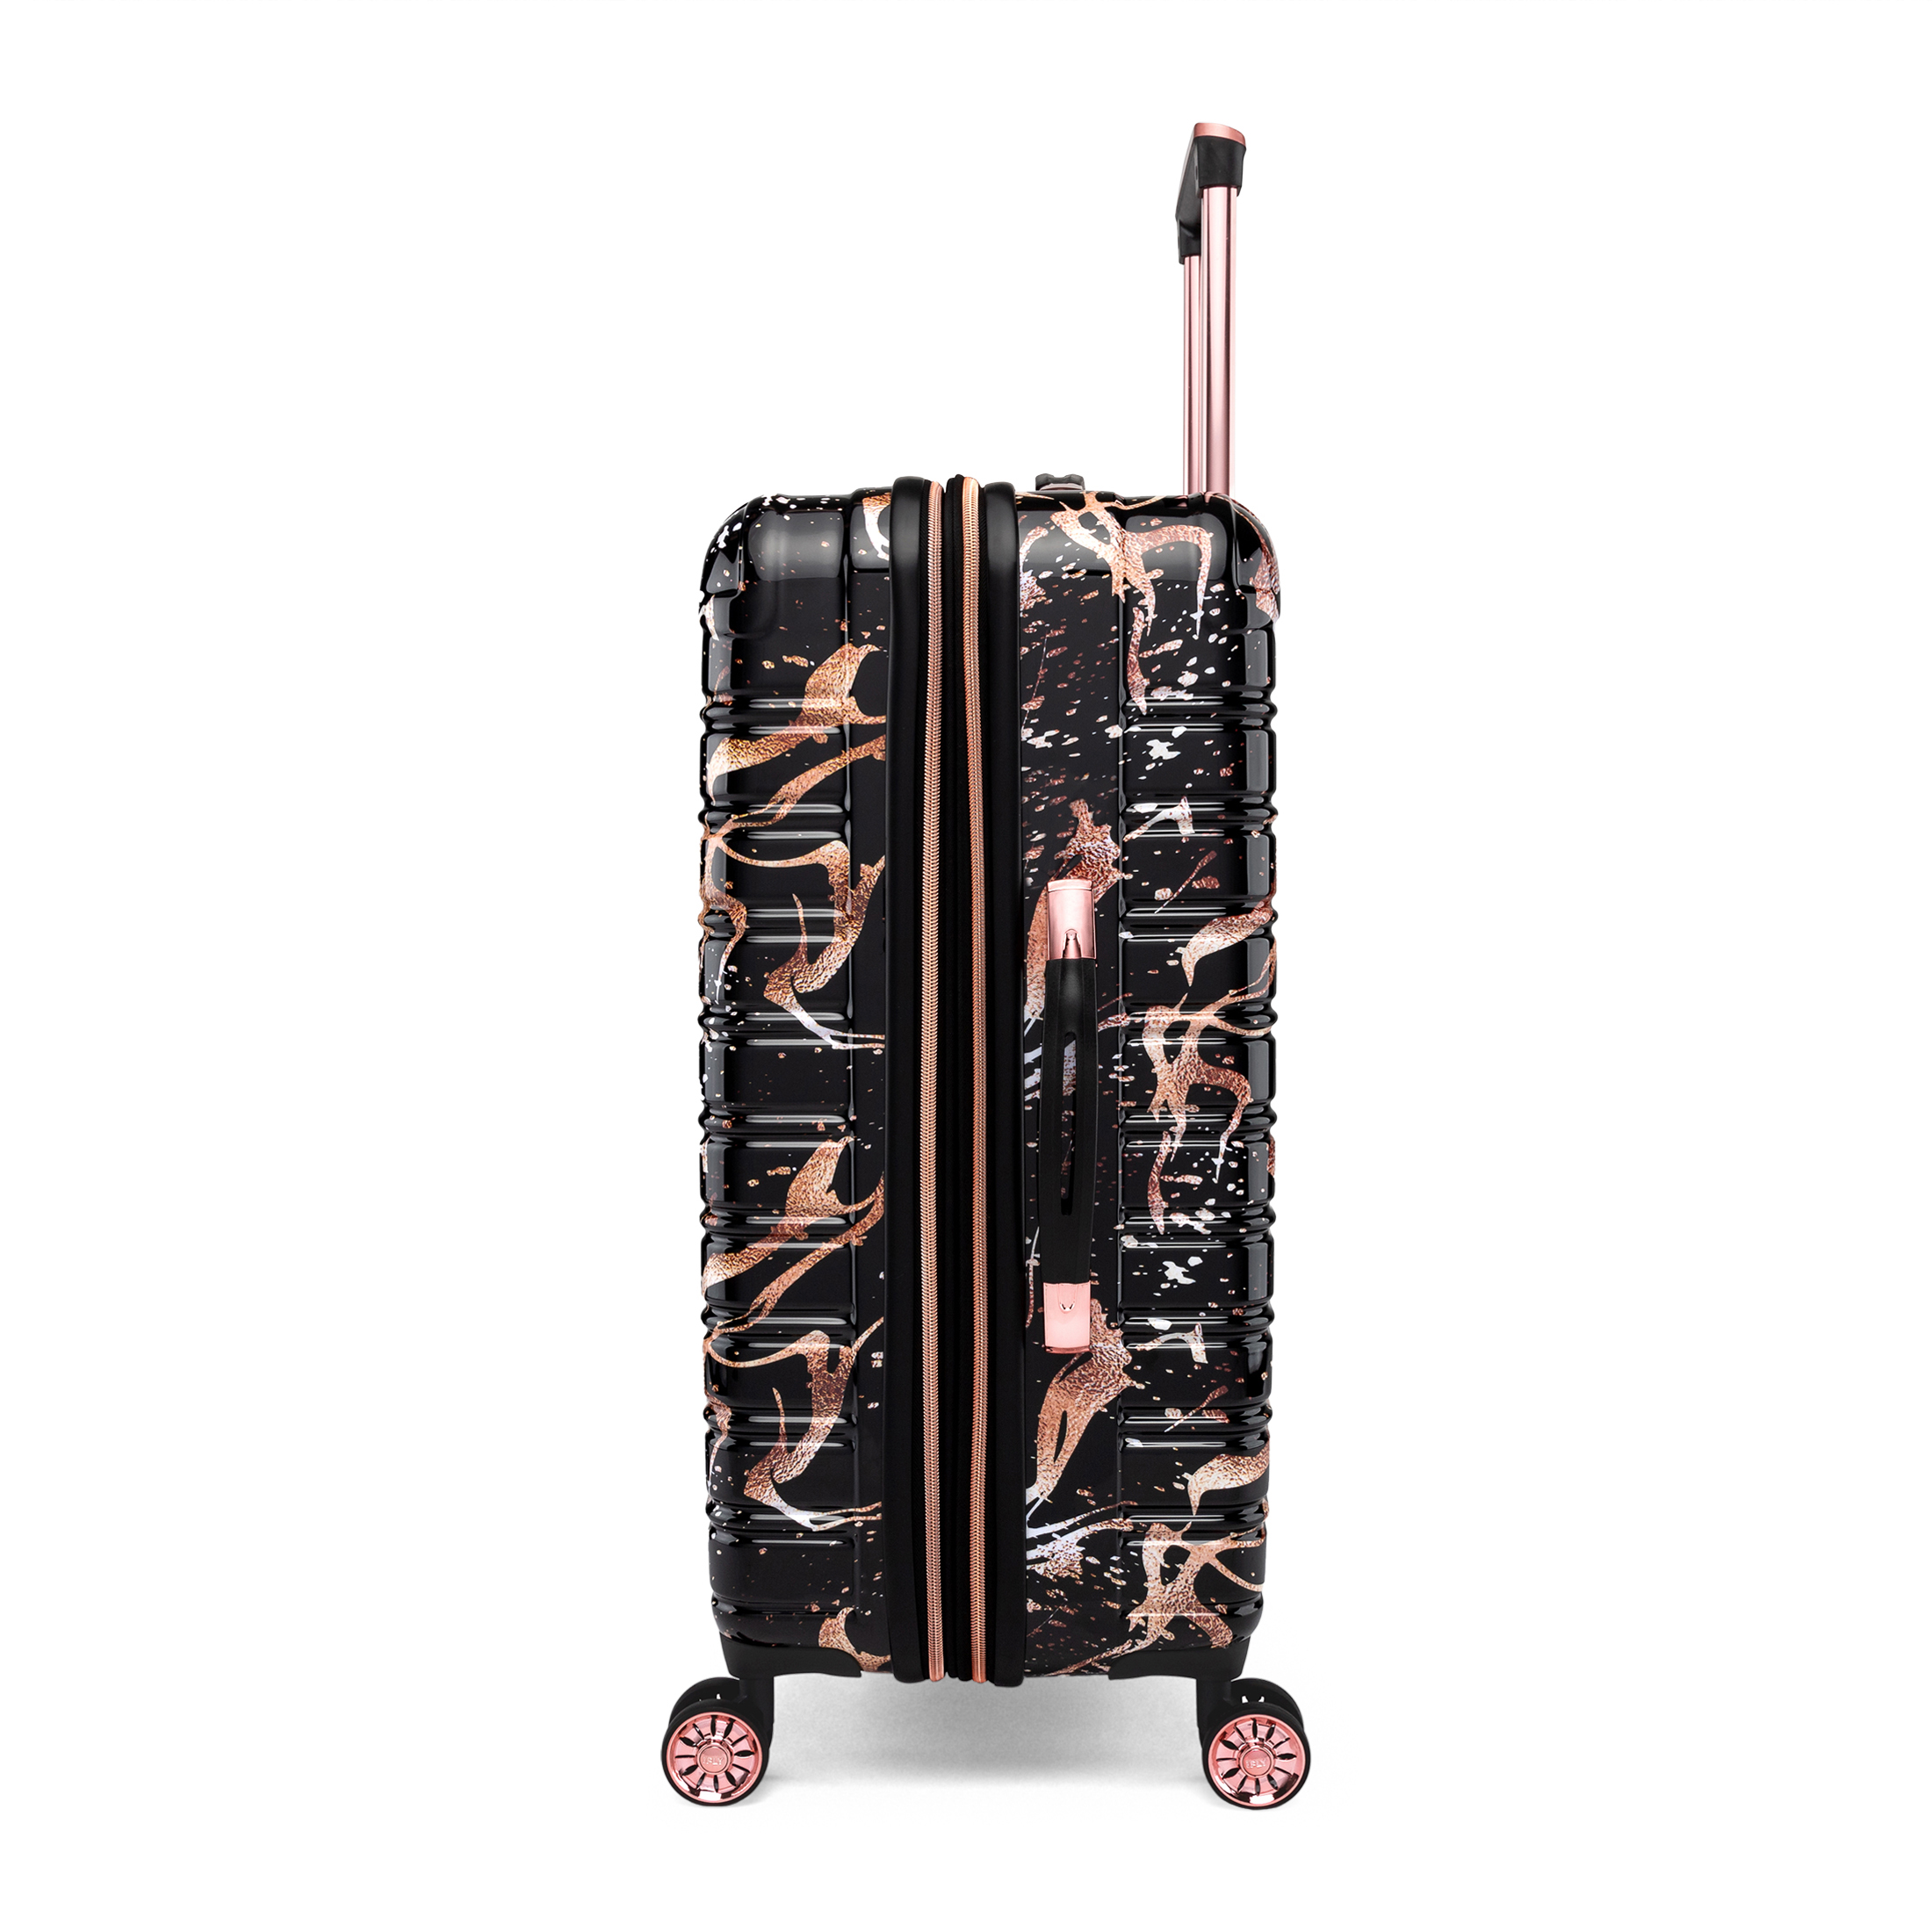 IFLY - Fibertech Marble Hardside Luggage 20 Inch Carry-on,  Black/Rose Gold - image 5 of 7